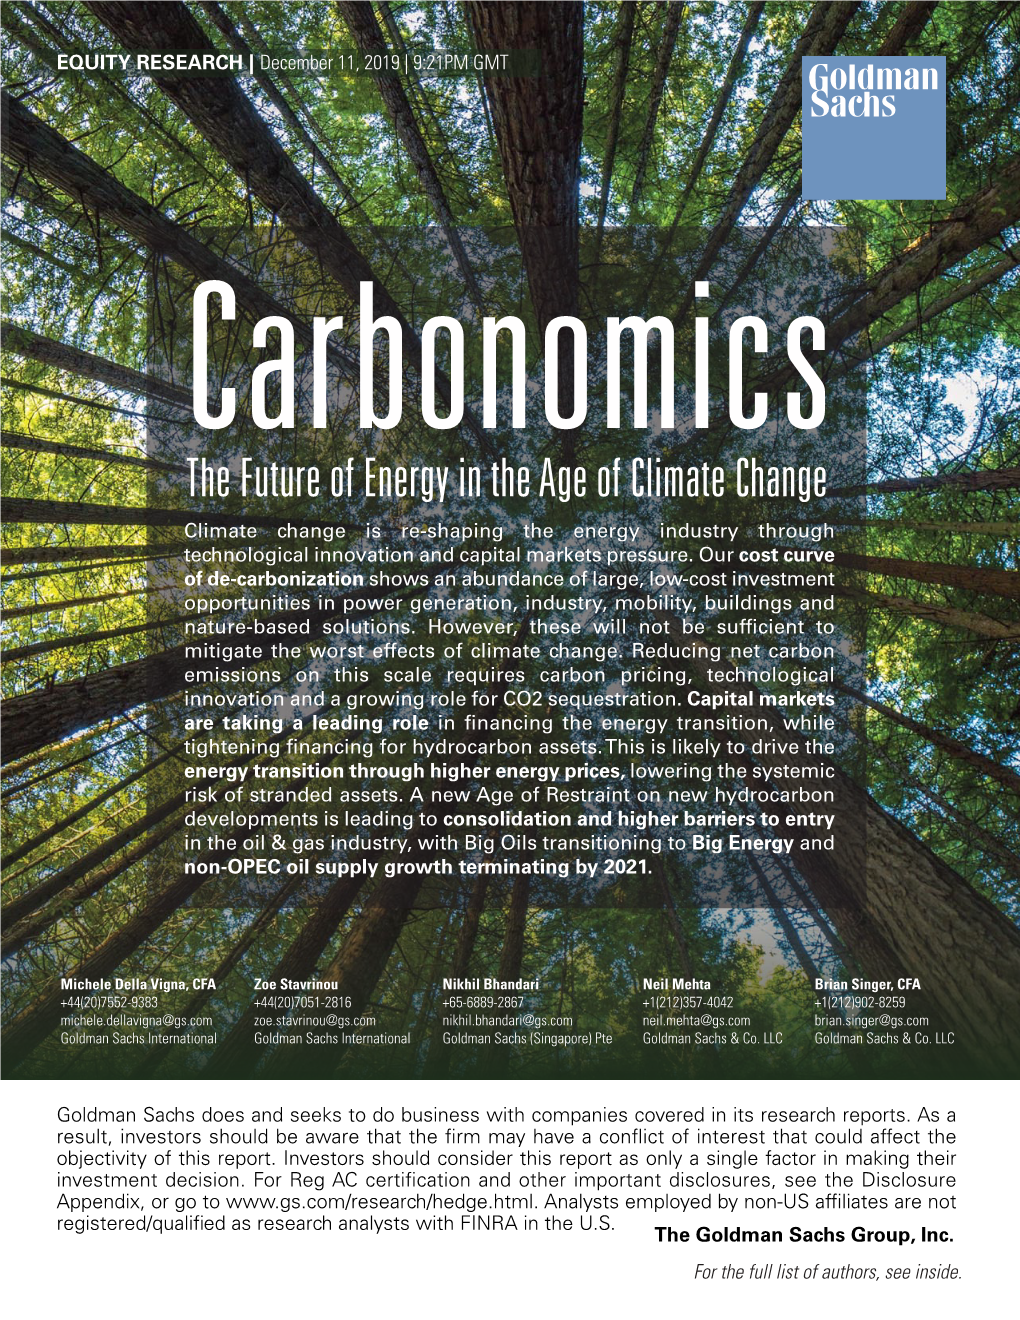 Carbonomics the Future of Energy in the Age of Climate Change